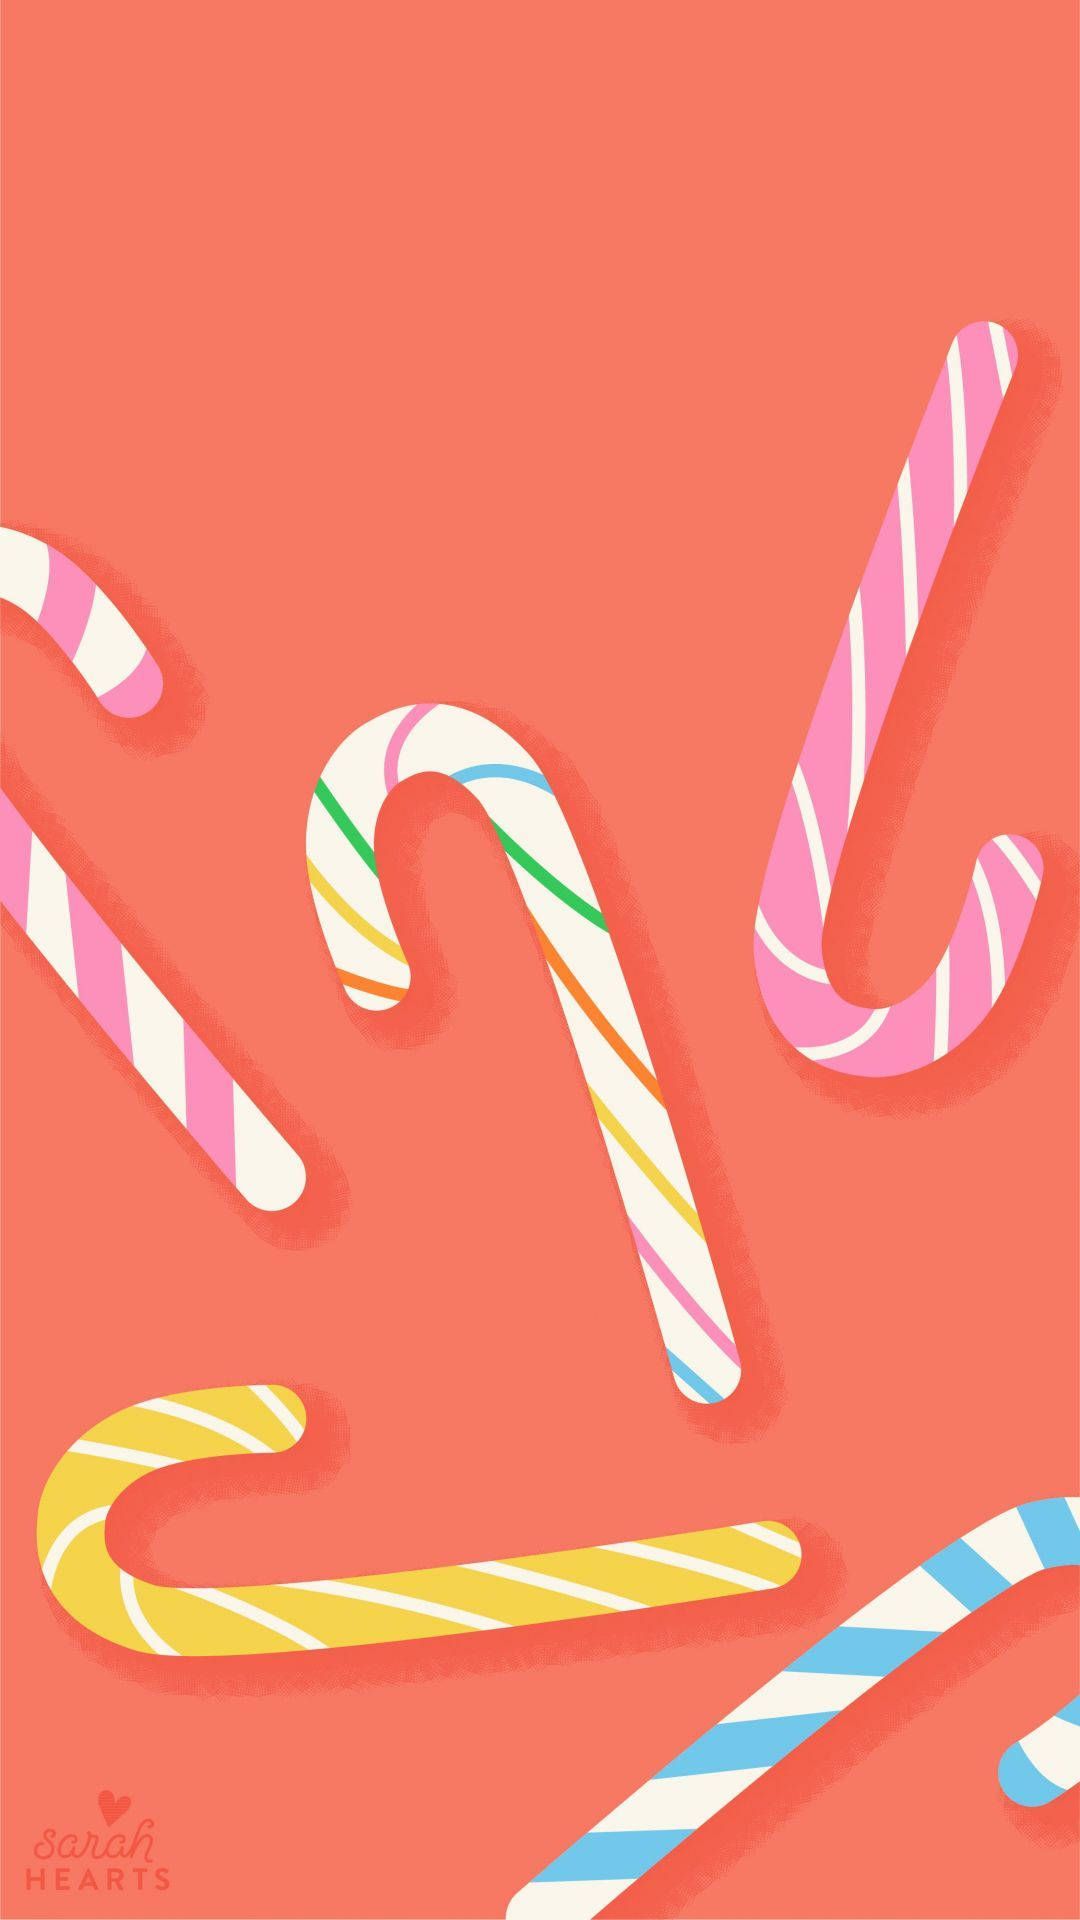 Download Candy Cane Colorful Graphic Wallpaper